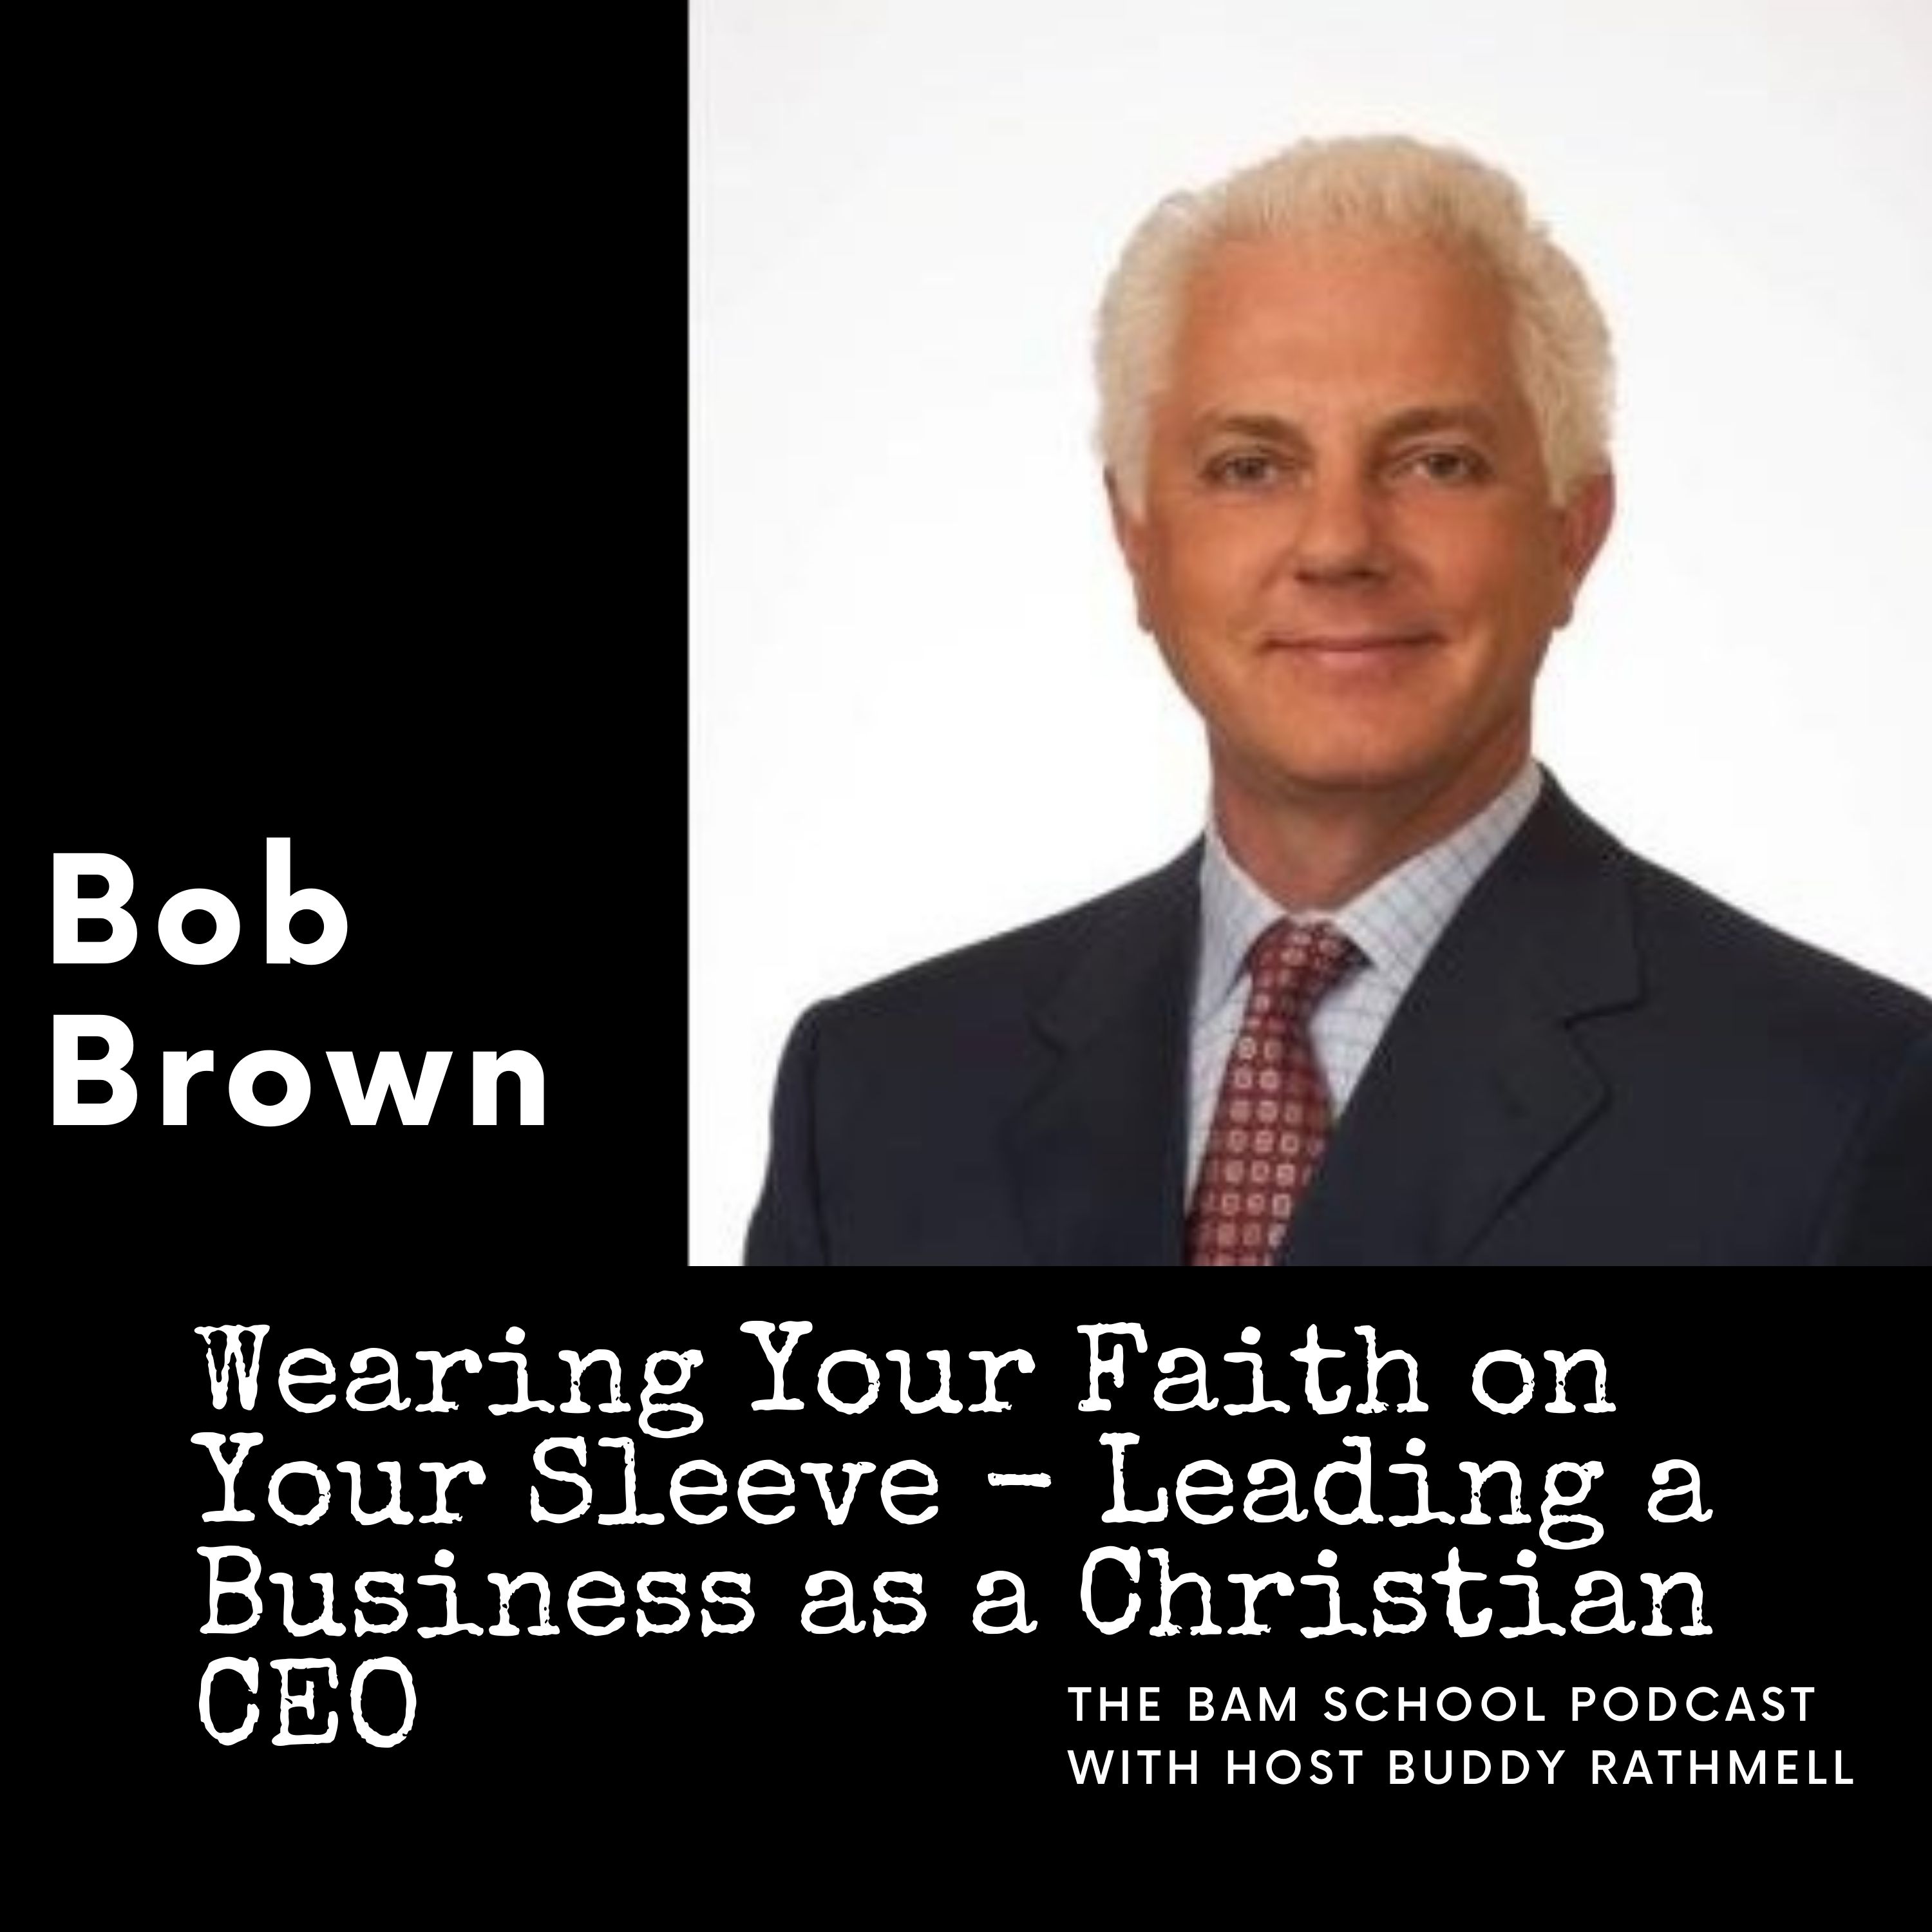 Bob Brown - Wearing Your Faith on Your Sleeve